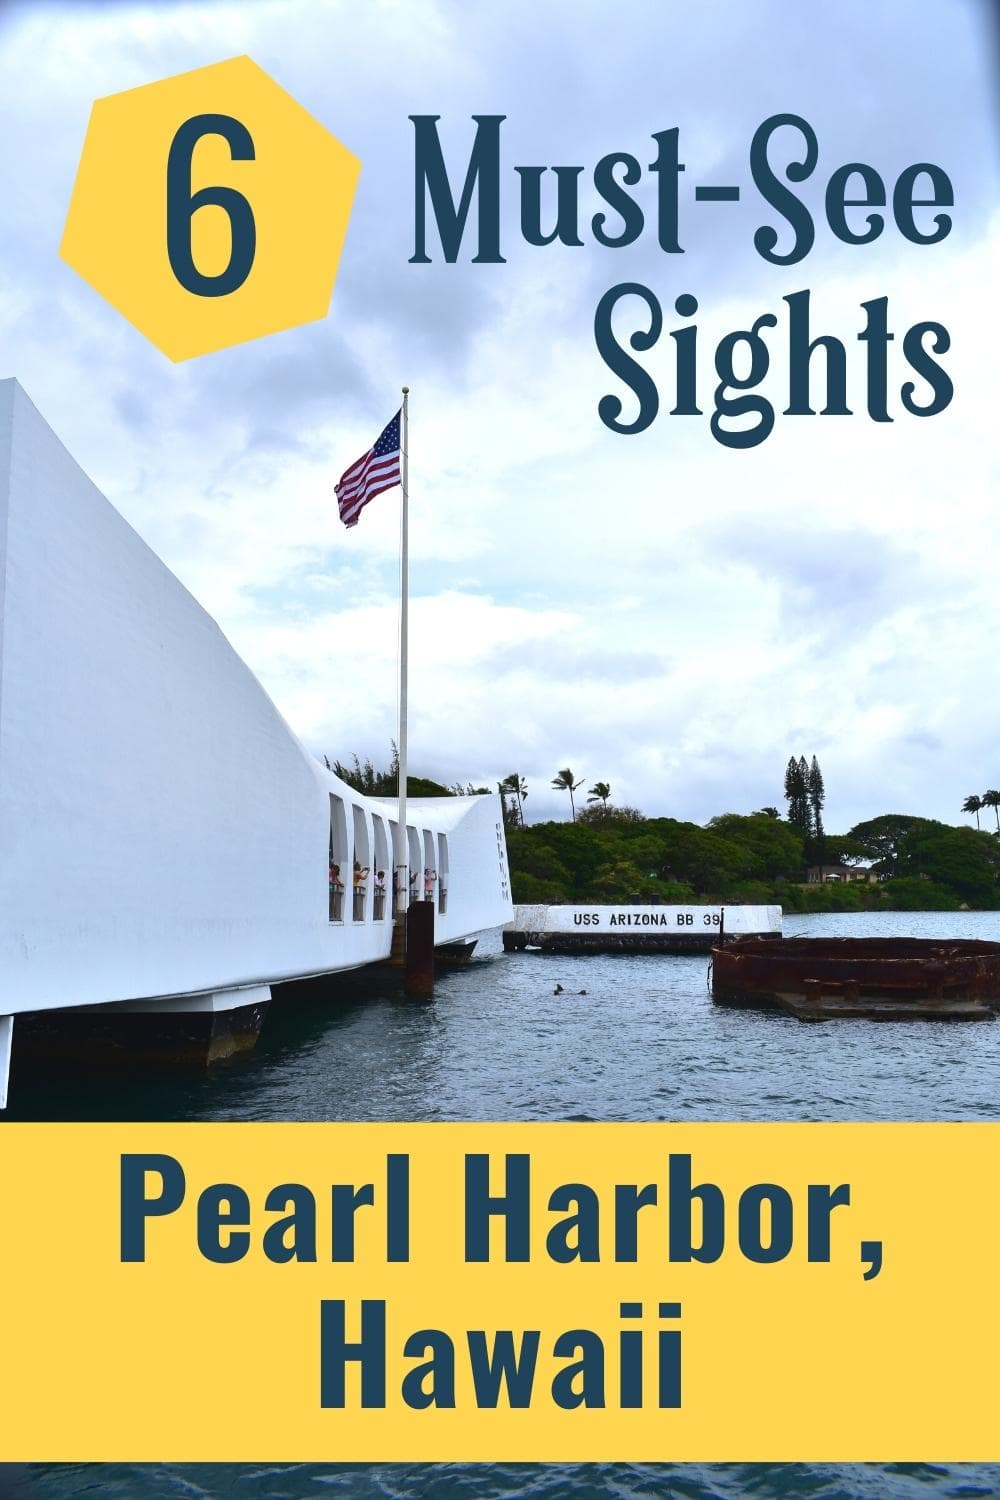 A Complete Guide for What to Do at Pearl Harbor, Hawaii